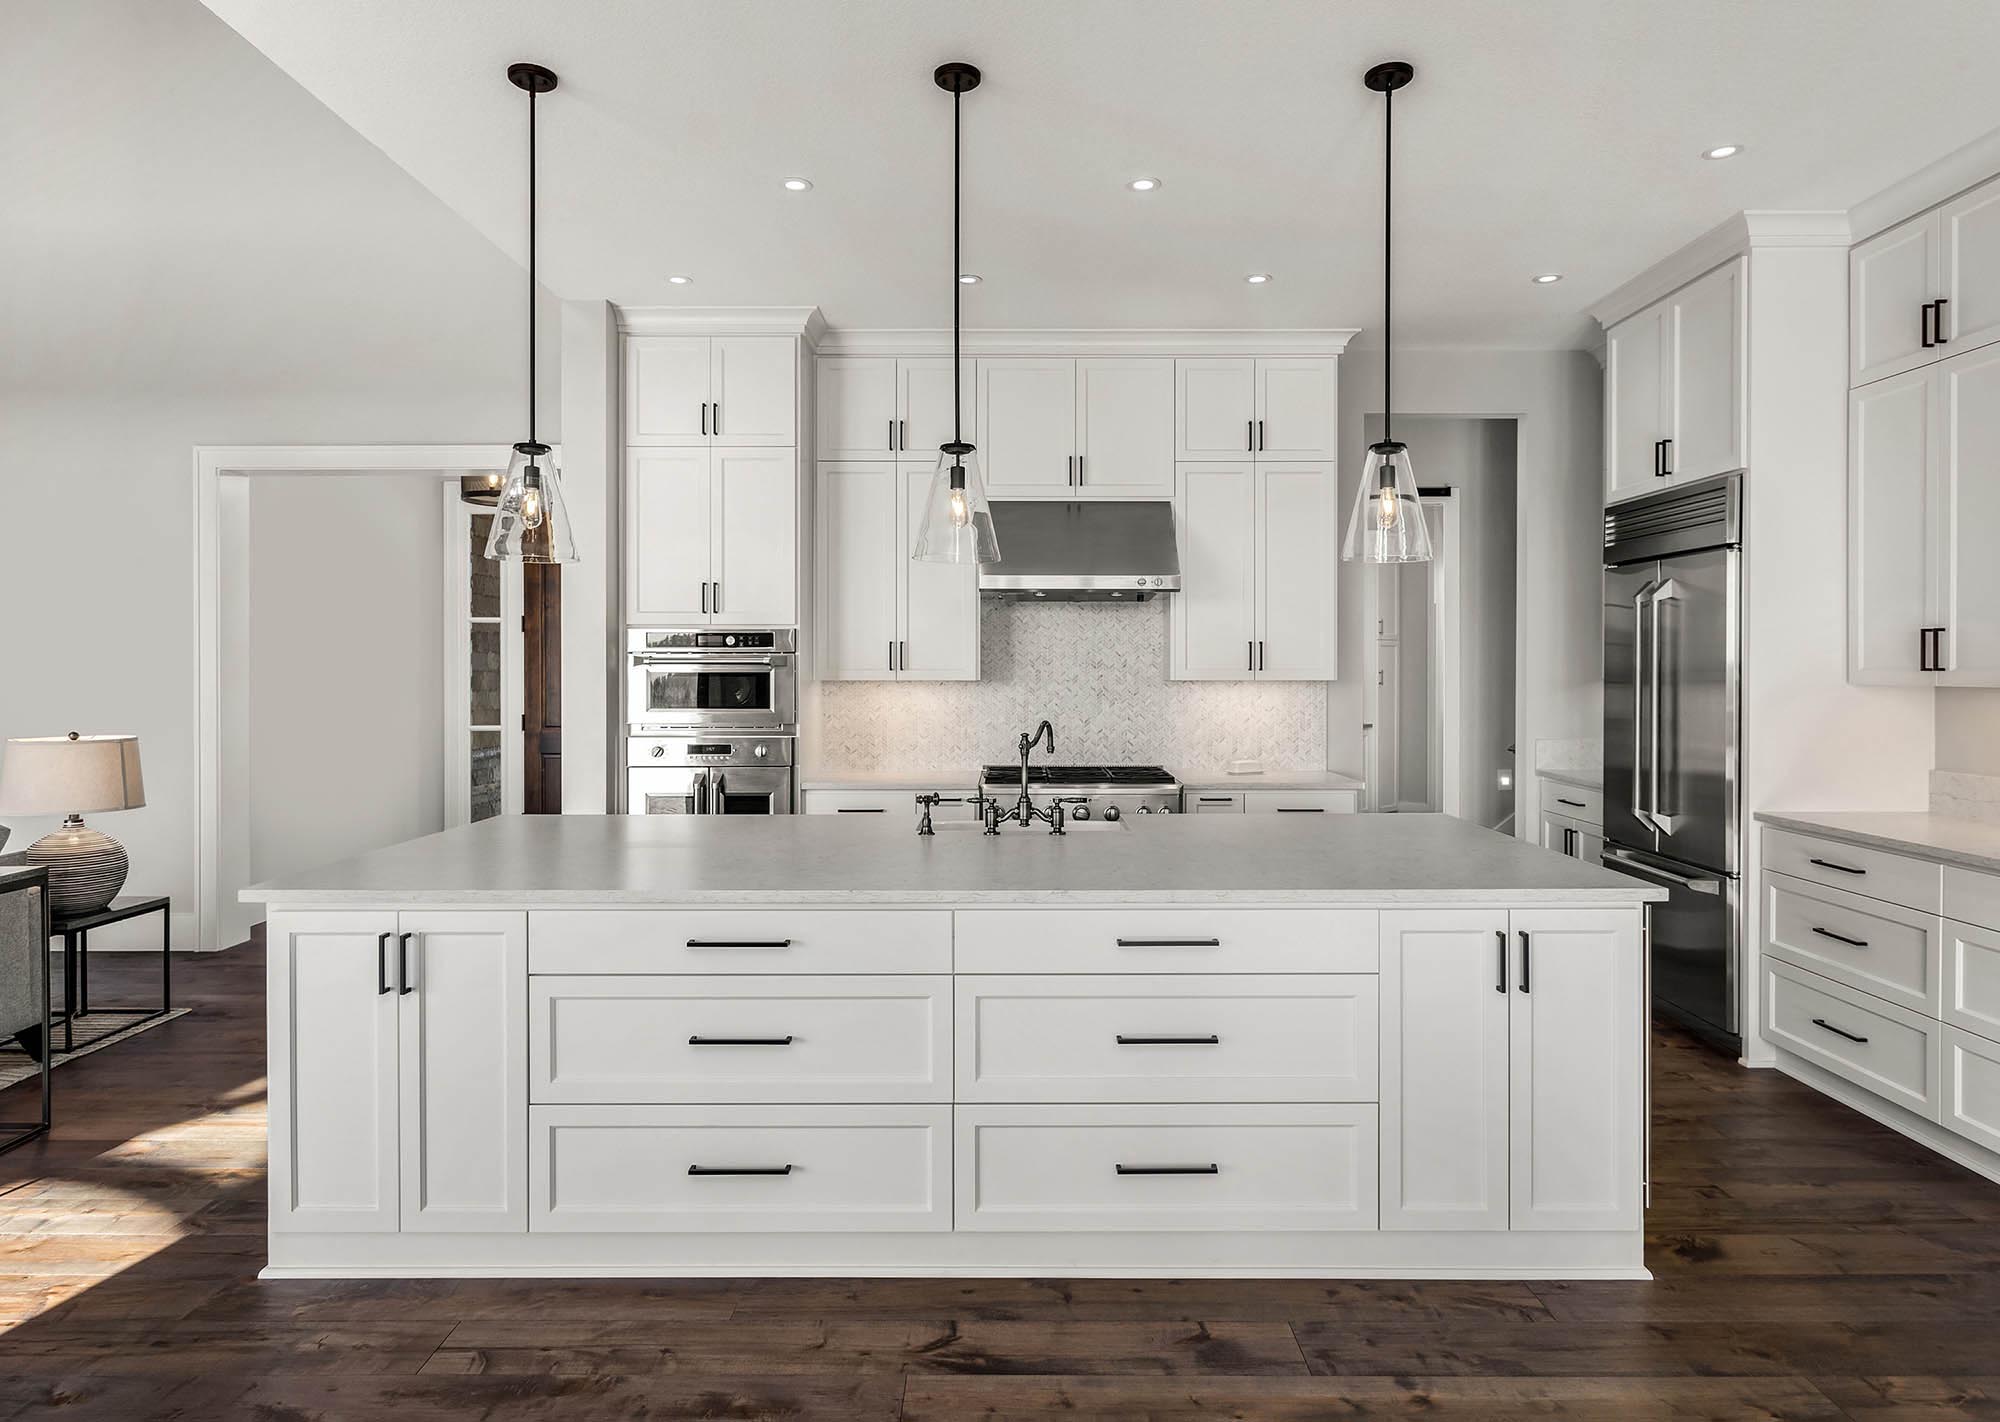 Kitchen remodeling trends in 2022